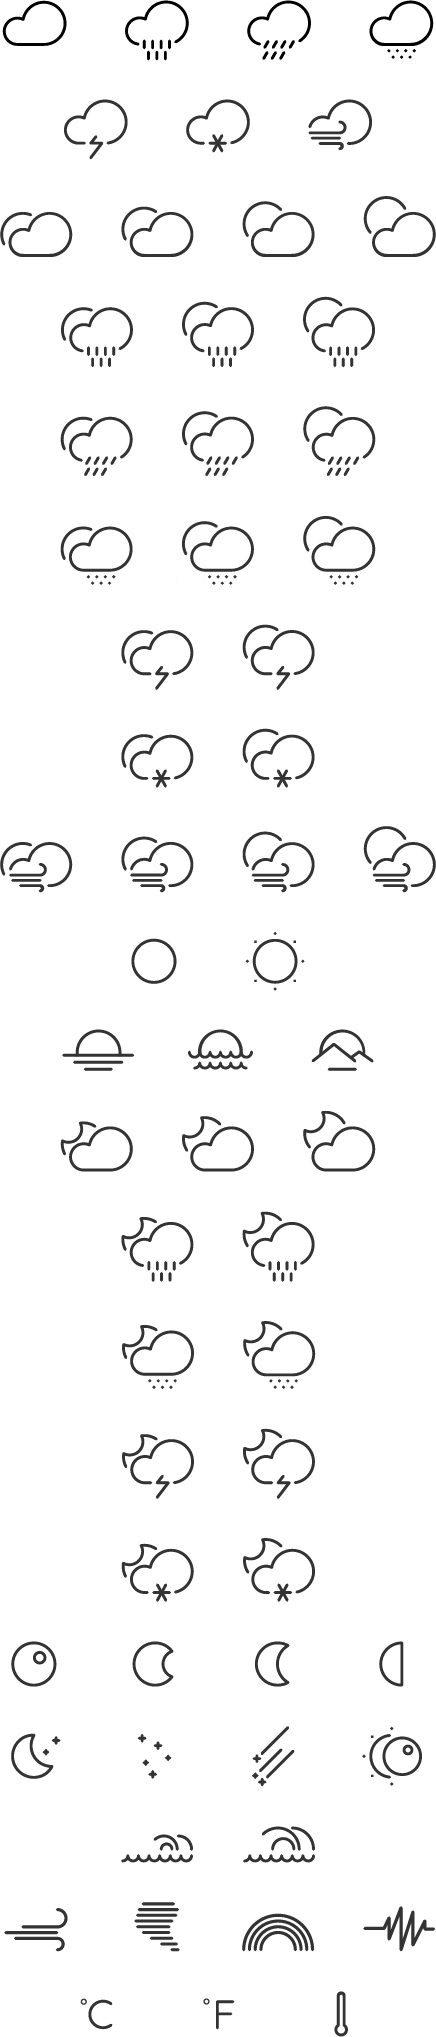 Cute weather line icons vector material